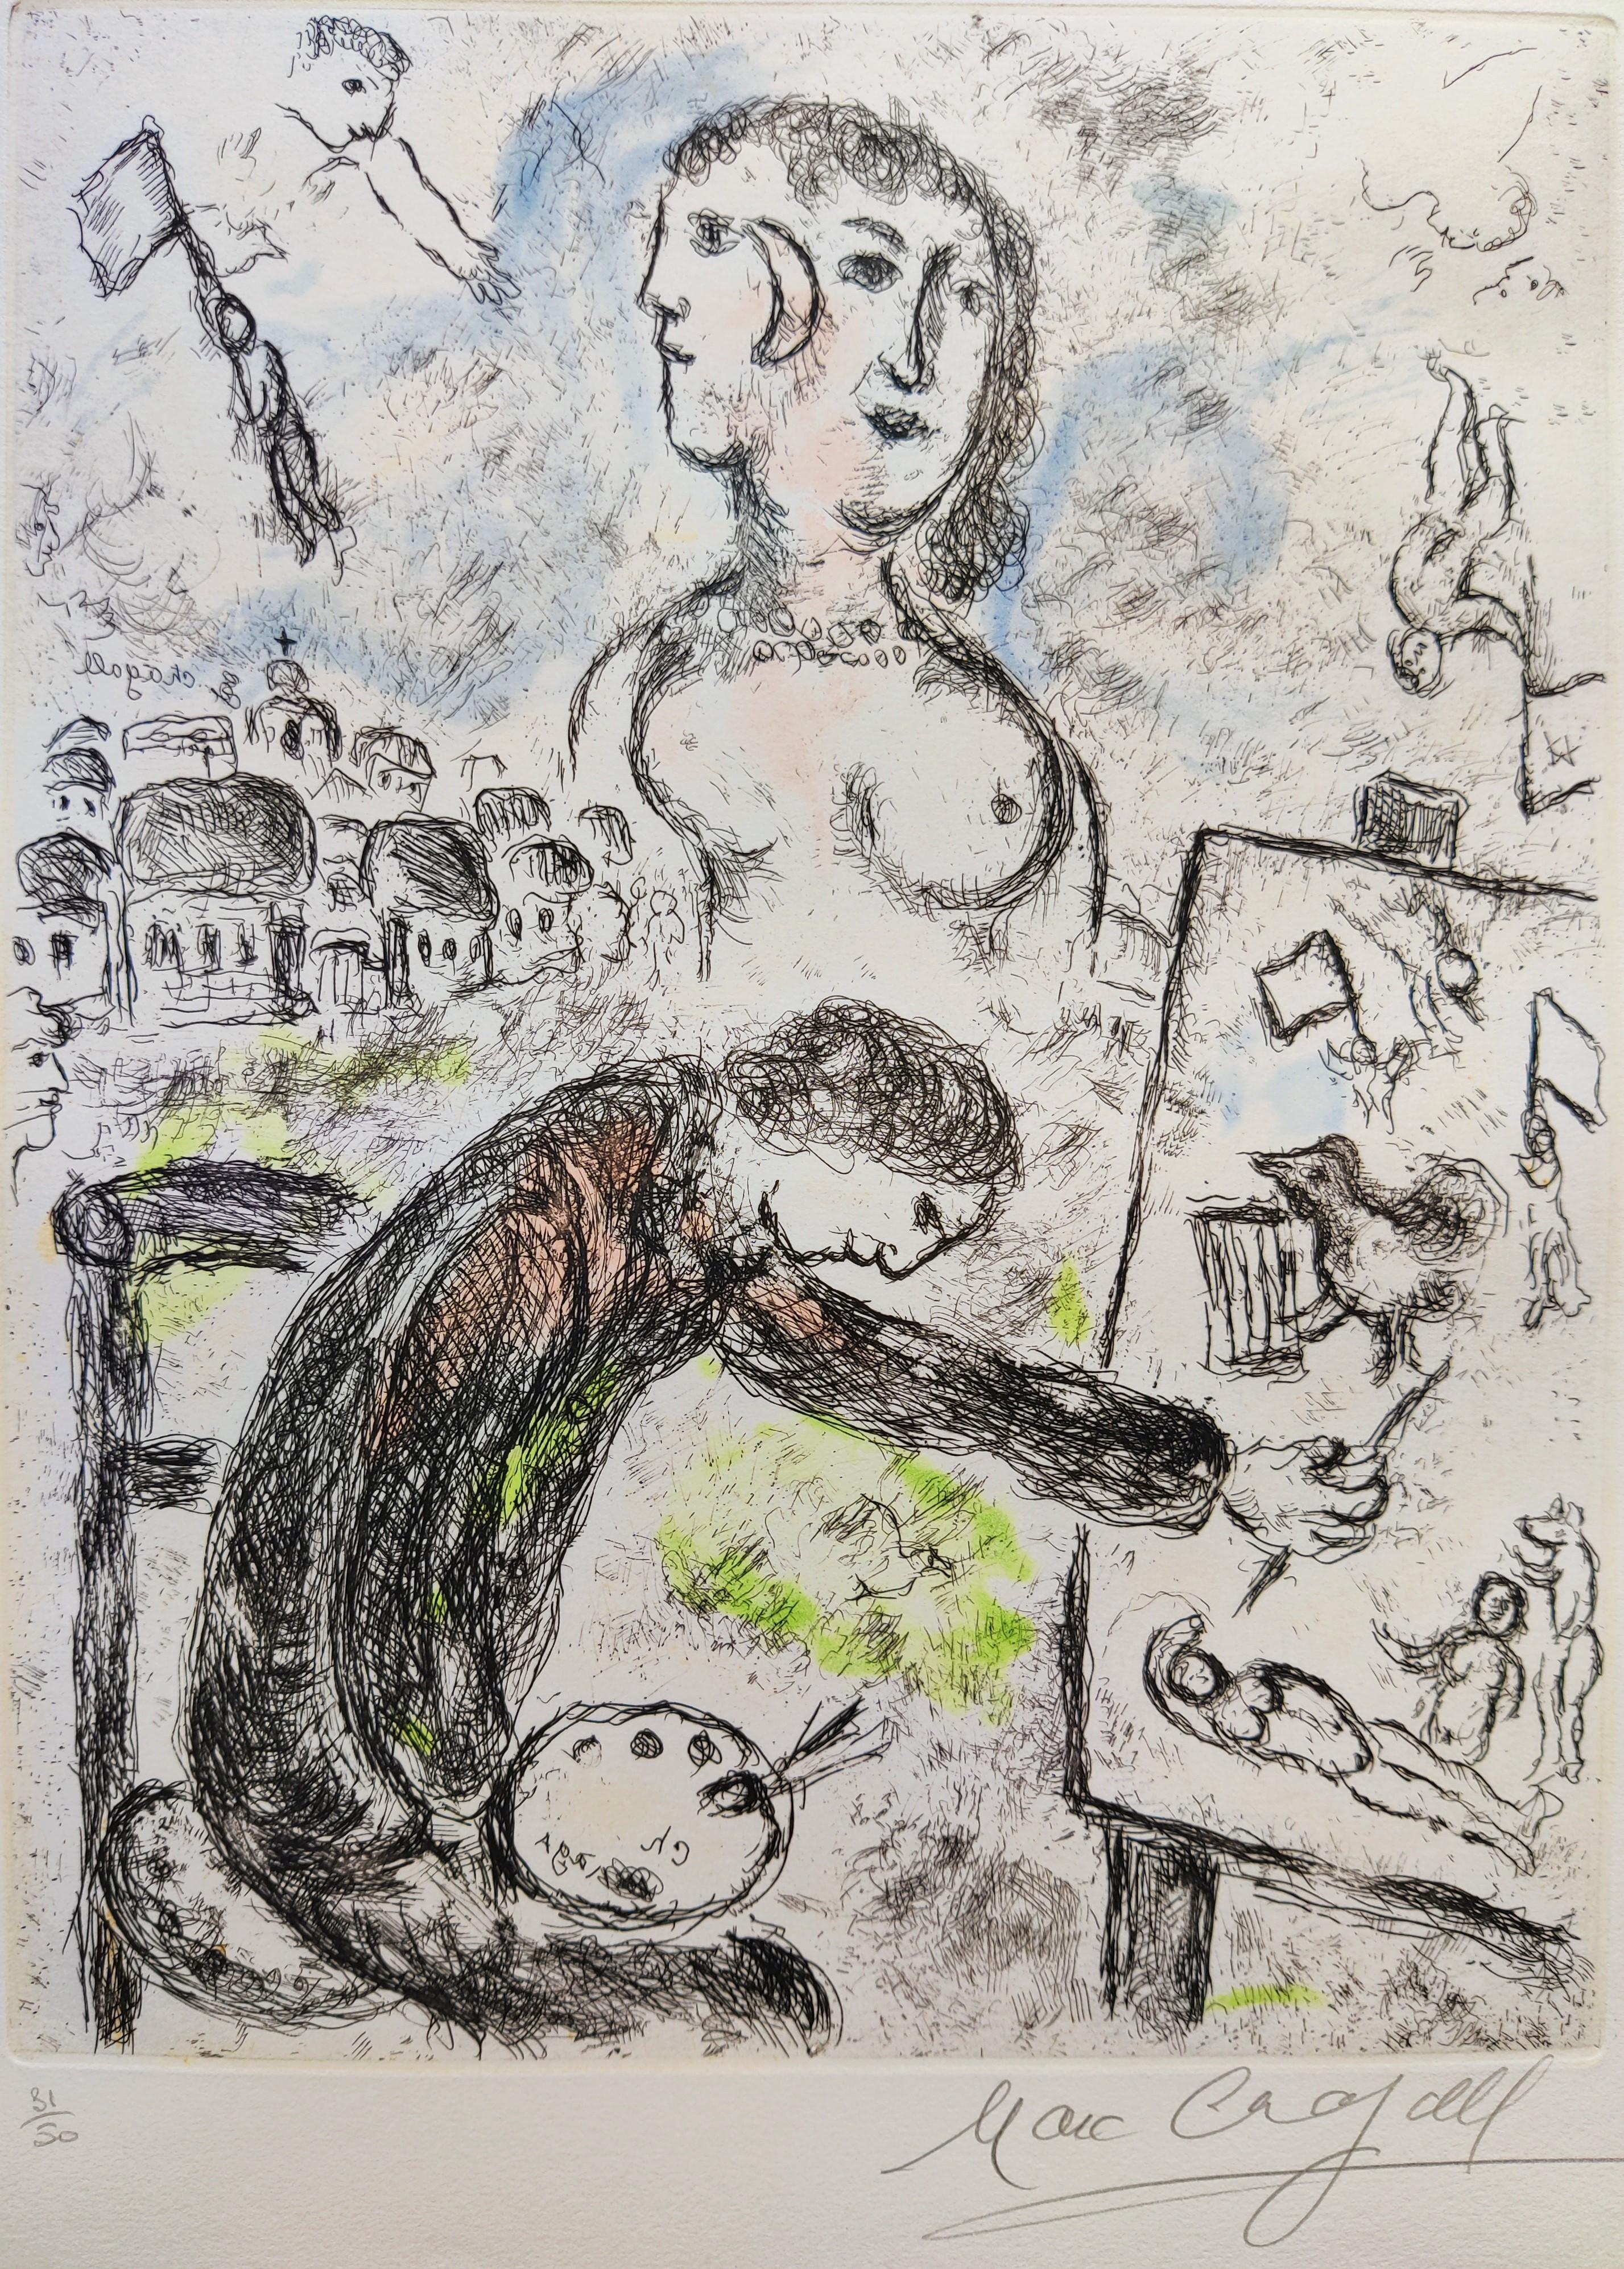 Marc Chagall
Le Peintre, from Songes (cf. C. books 112)
etching with aquatint in colours, 1981, 
Signed low right
Edition  31/50
Published by G. Cramer, Geneva, with wide margins
Image  30 x 23.5 cm
Sheet  52 x 37.5 cm.
Unframed 
Framing is an